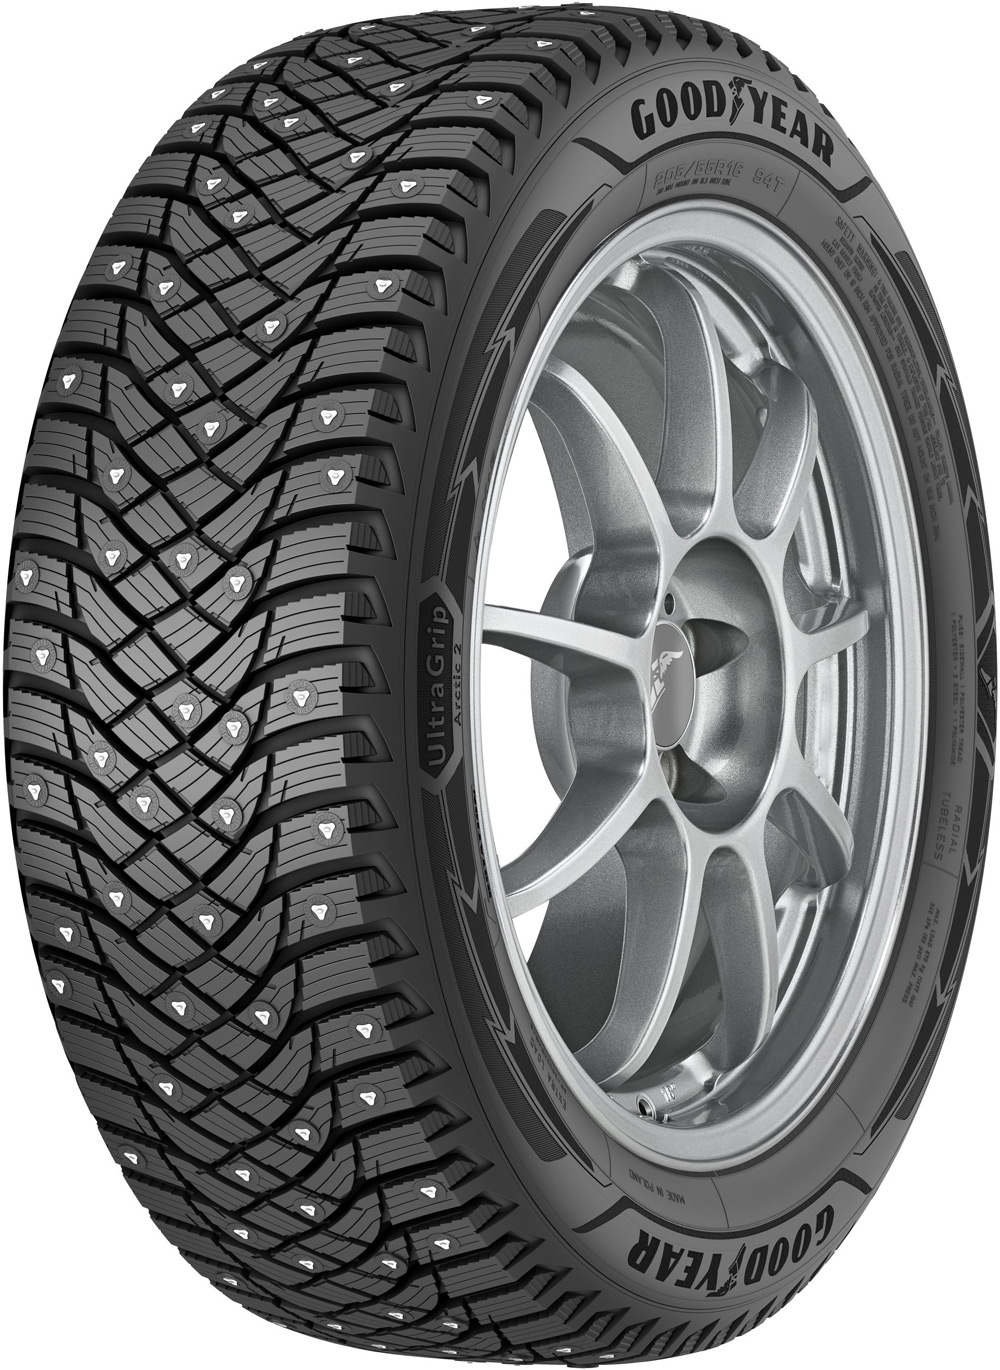 Anvelope auto GOODYEAR Ultra Grip Arctic 2 XL 245/45 R18 100T